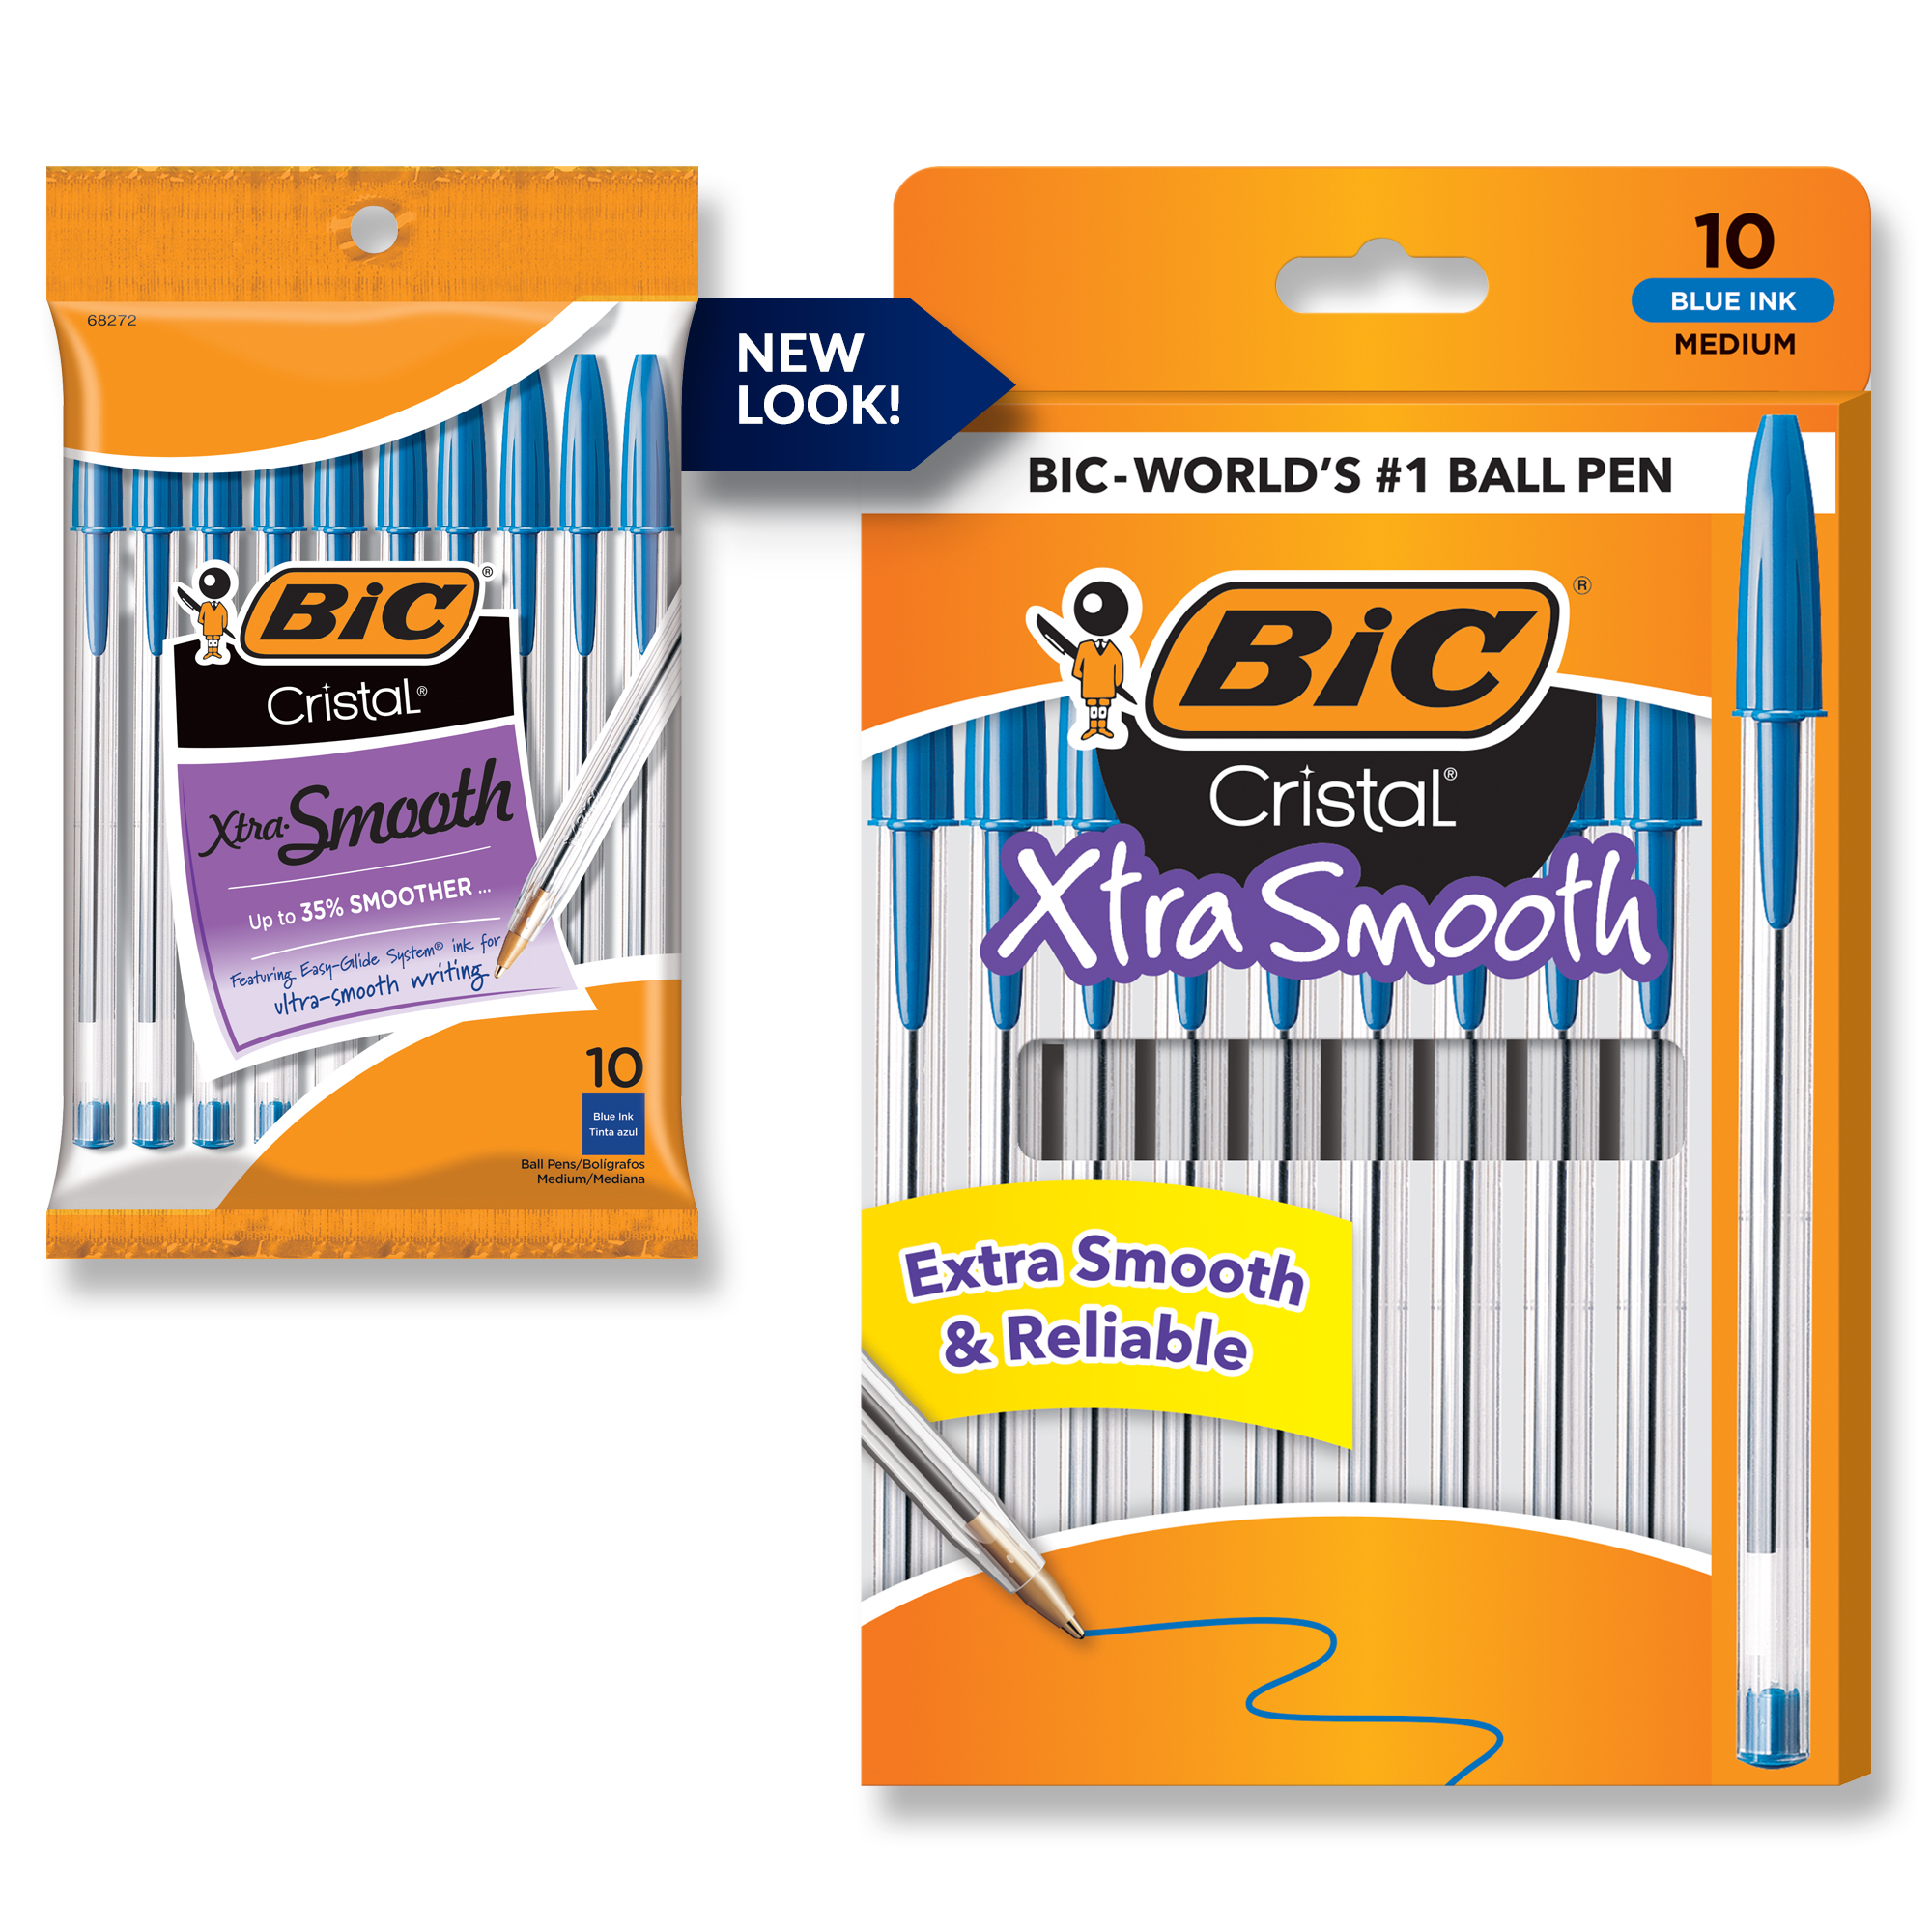 BIC Cristal Xtra Smooth Ballpoint Stick Pens, 1.0 mm, Blue Ink, Pack of 10 - image 5 of 10